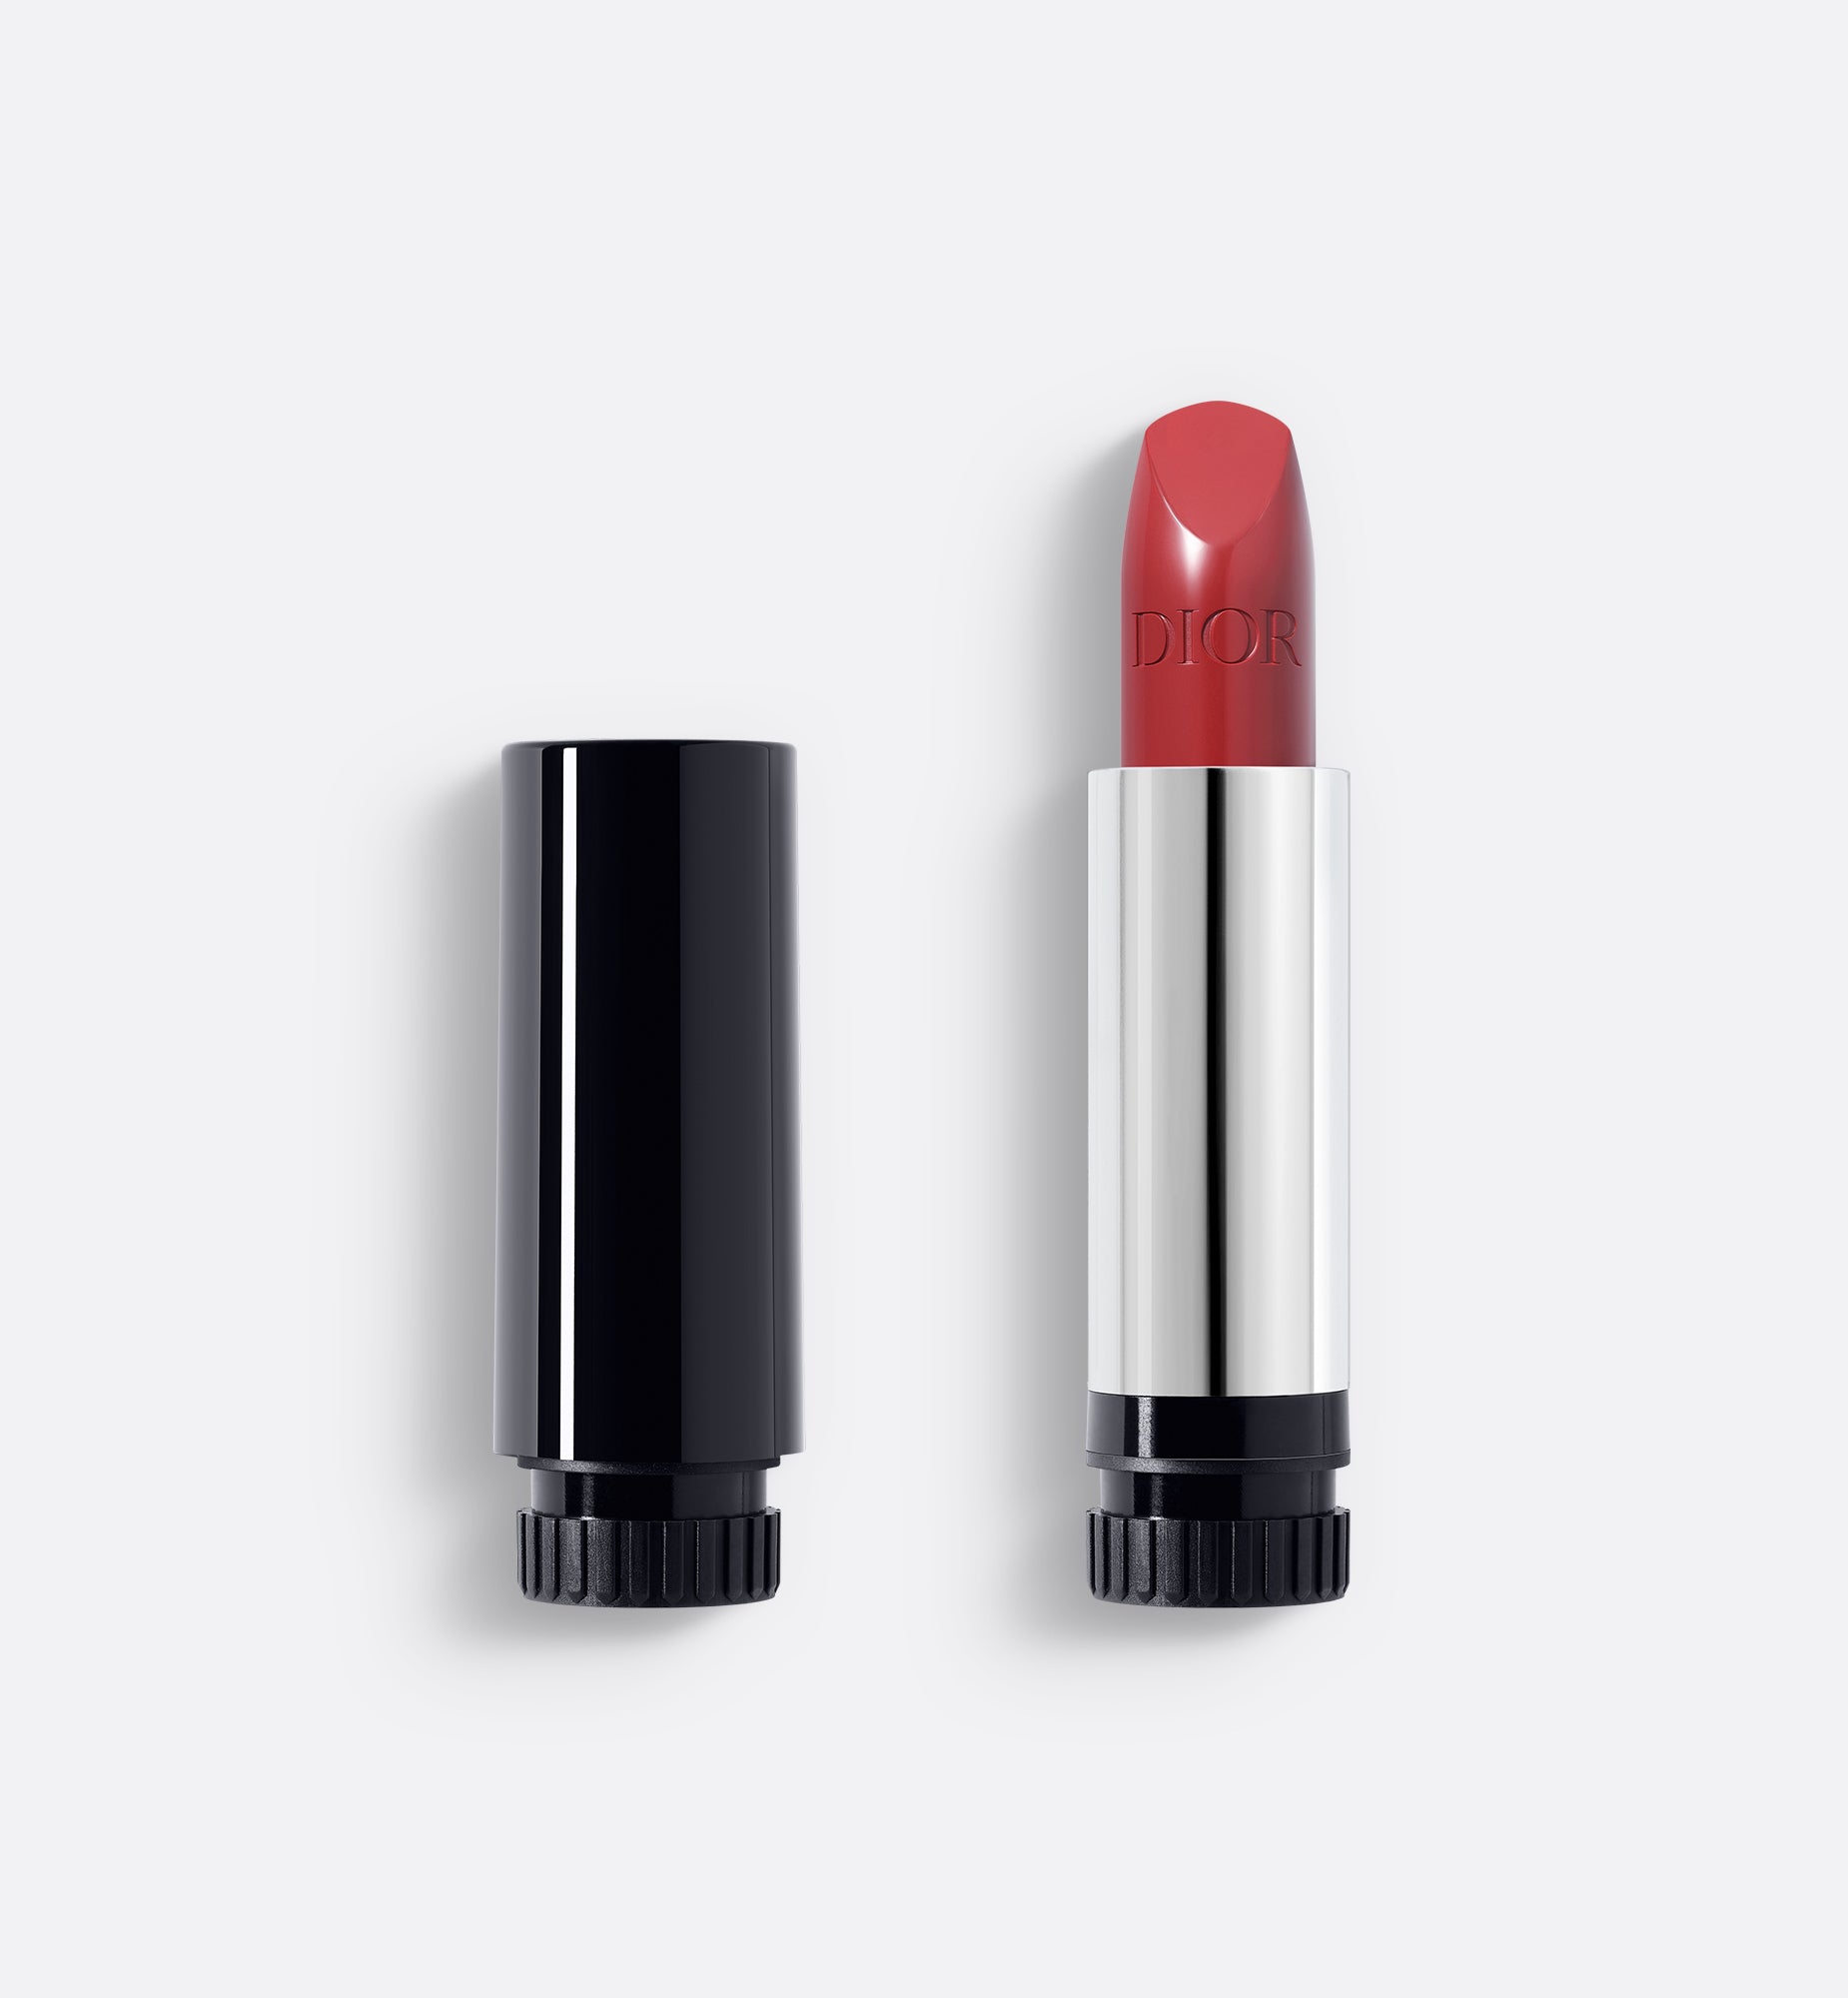 Rouge Dior The Refill | Couture Color Lipstick - Velvet and Satin Finishes - Hydrating Floral Lip Care - Long Wear